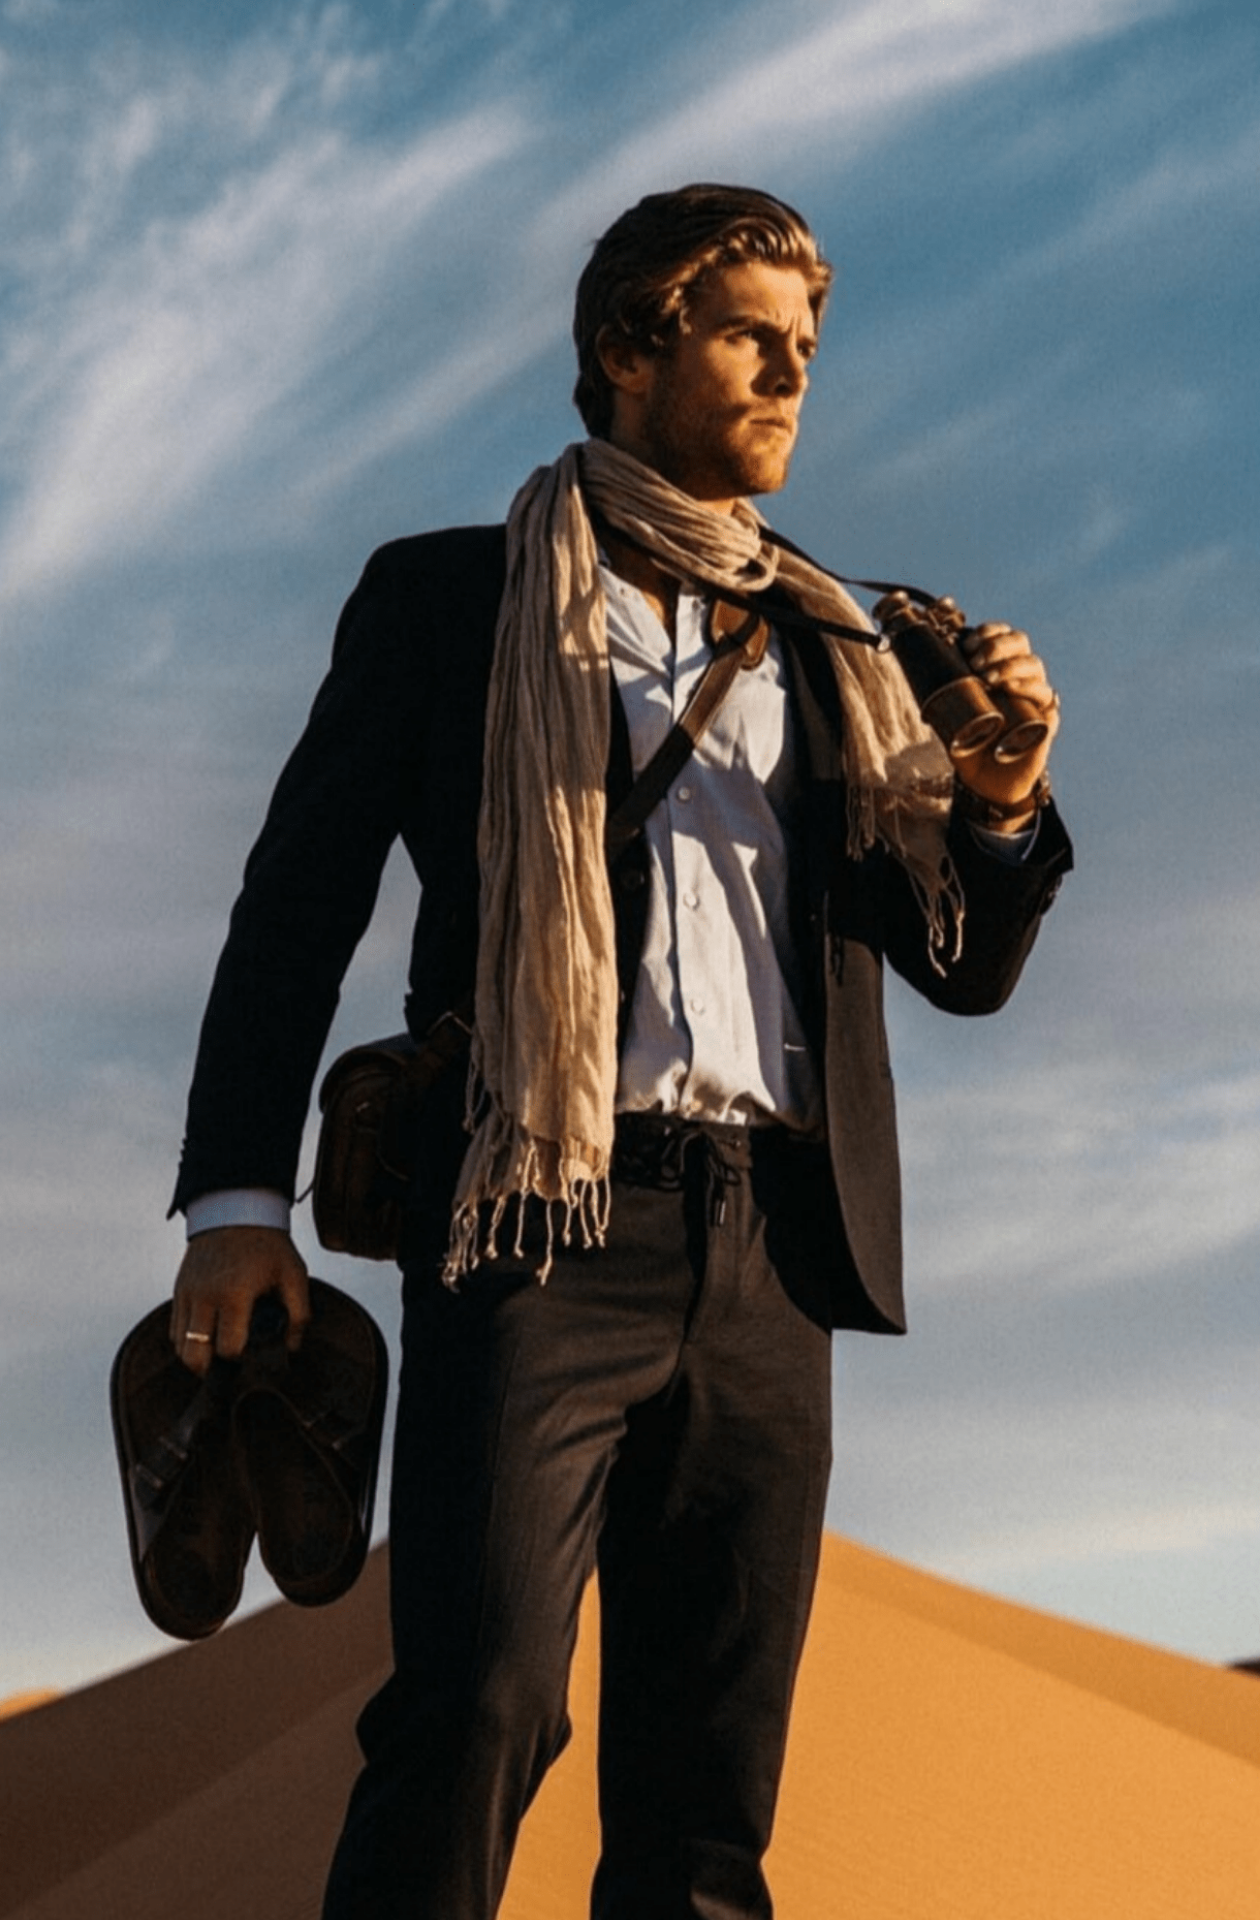 Jungle Moss scarf around a mans neck, he wears a suit and a camera bag with vintage binoculars in his hand. He is holding his shoes in the other hand and standing in a desert against a bright blue sky with wispy clouds